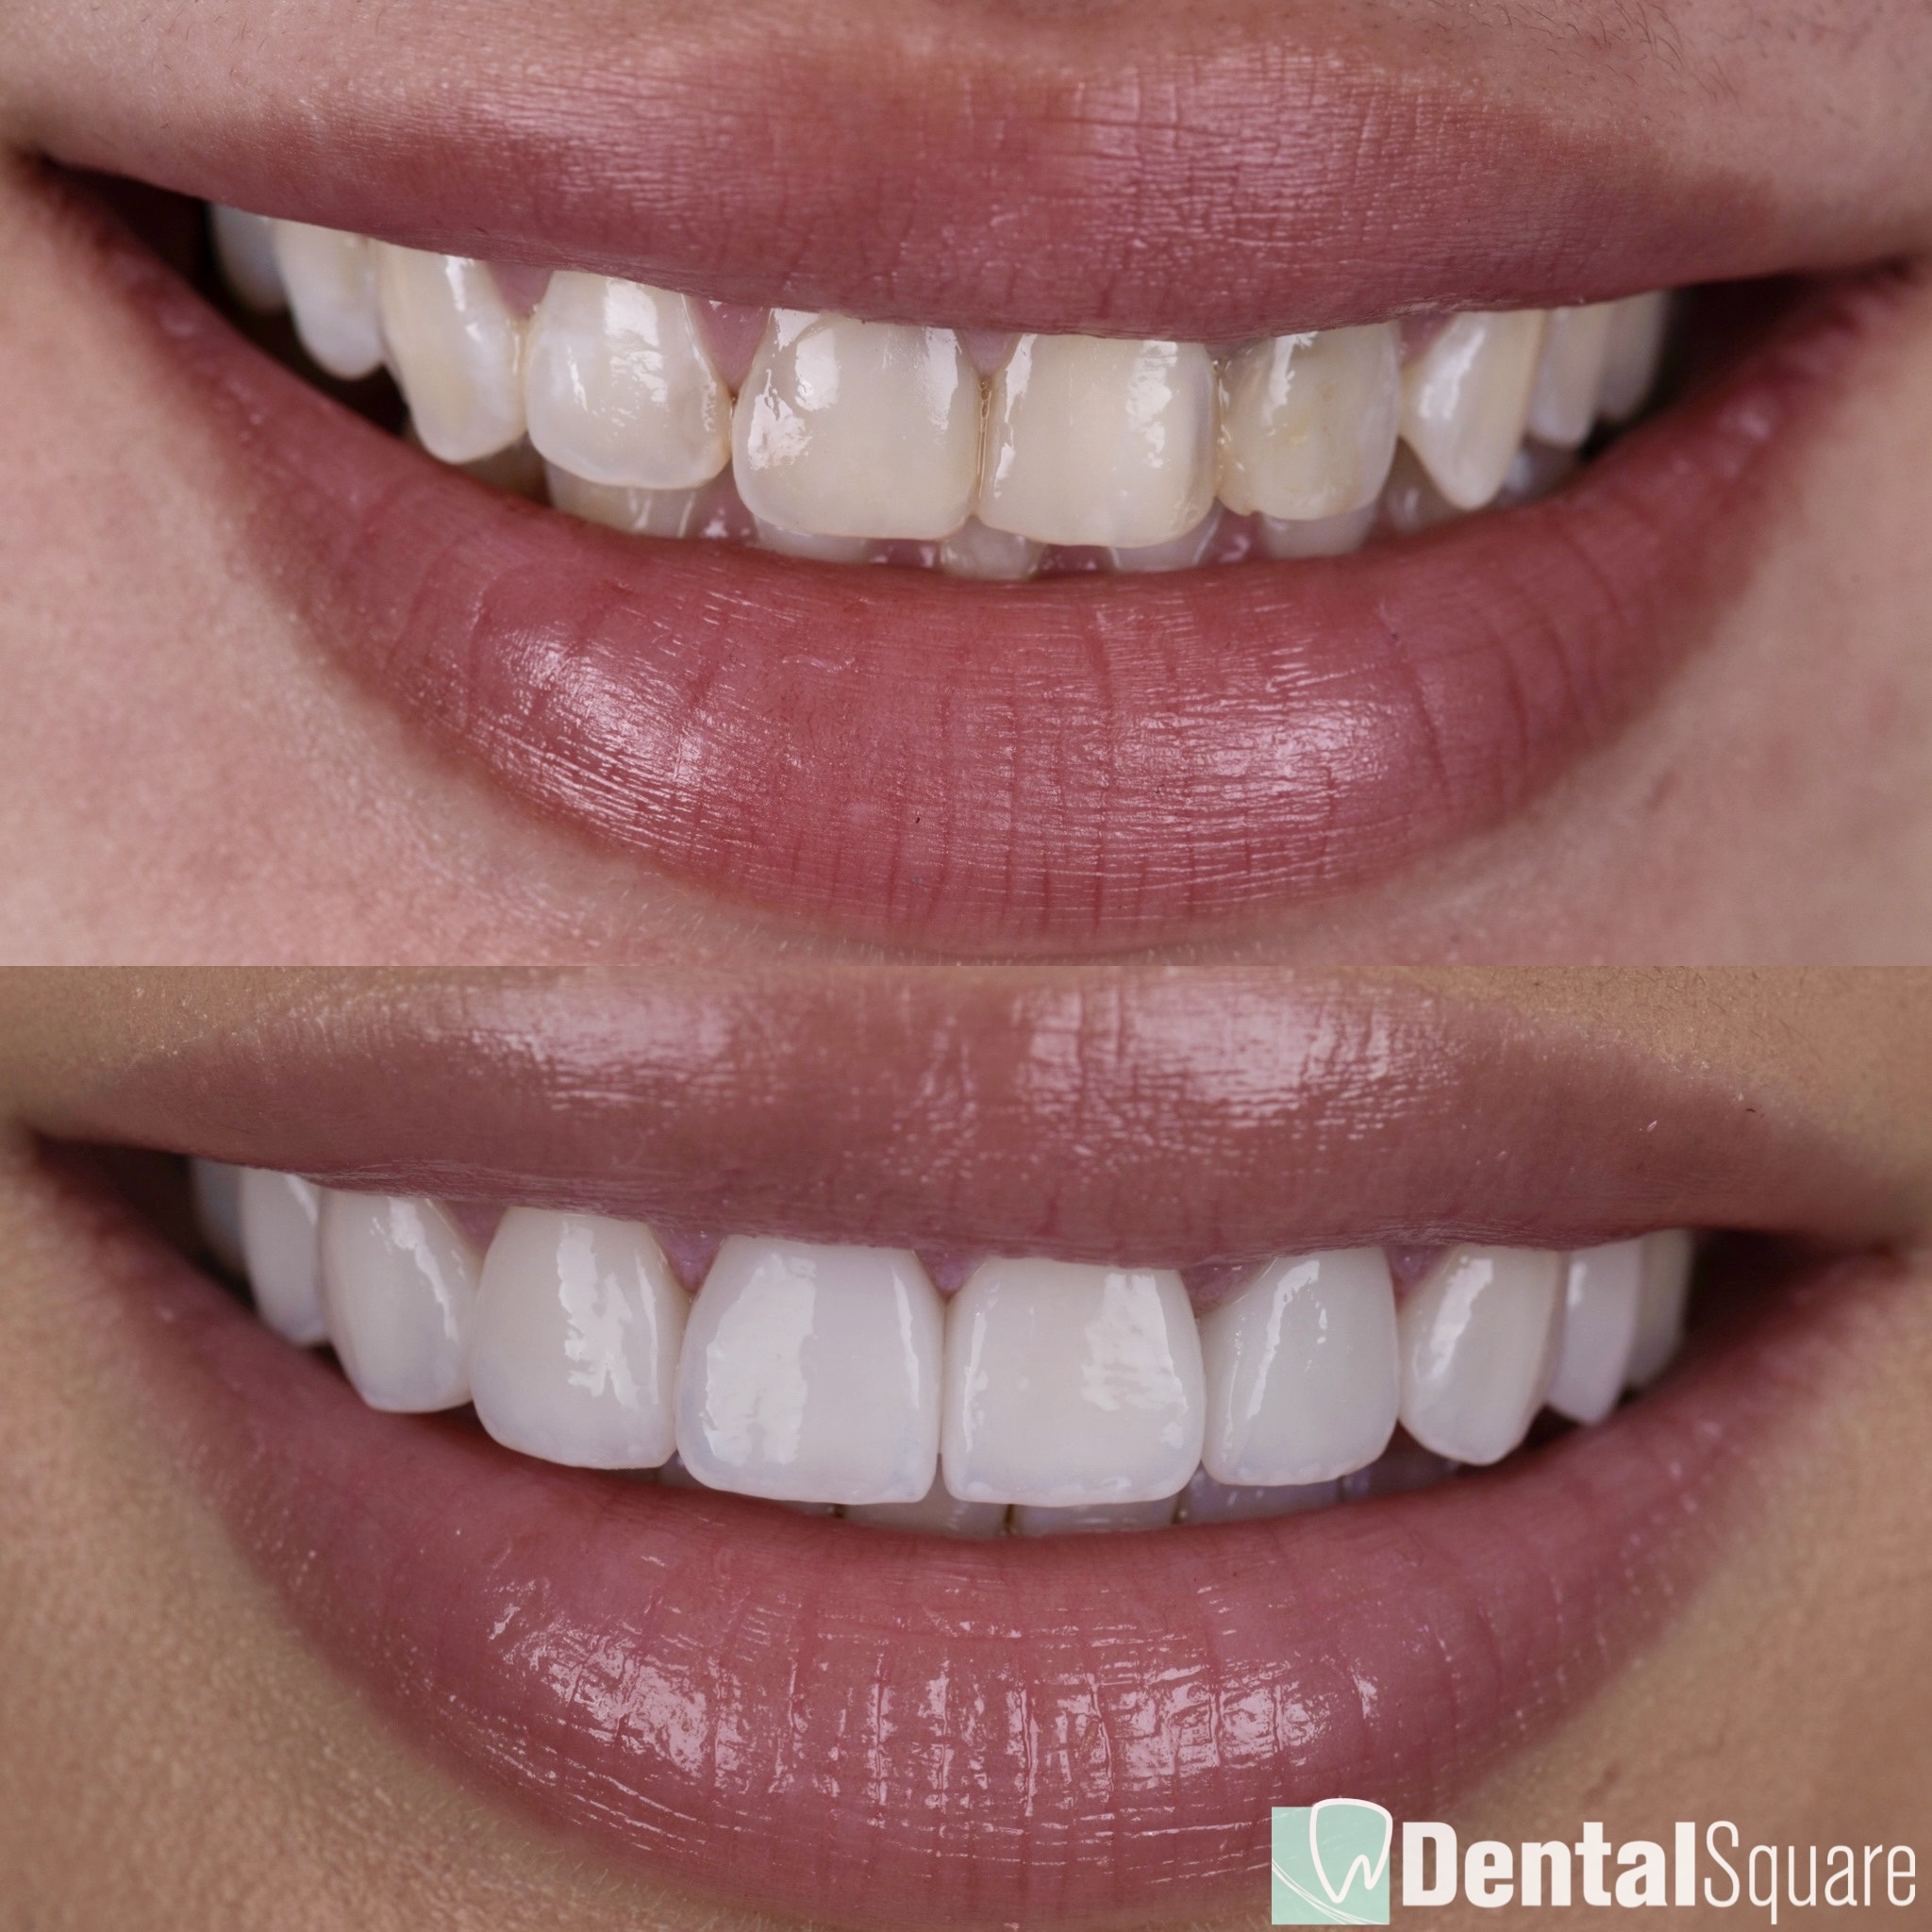 Treatment of stains and cavities with healthy looking veneers